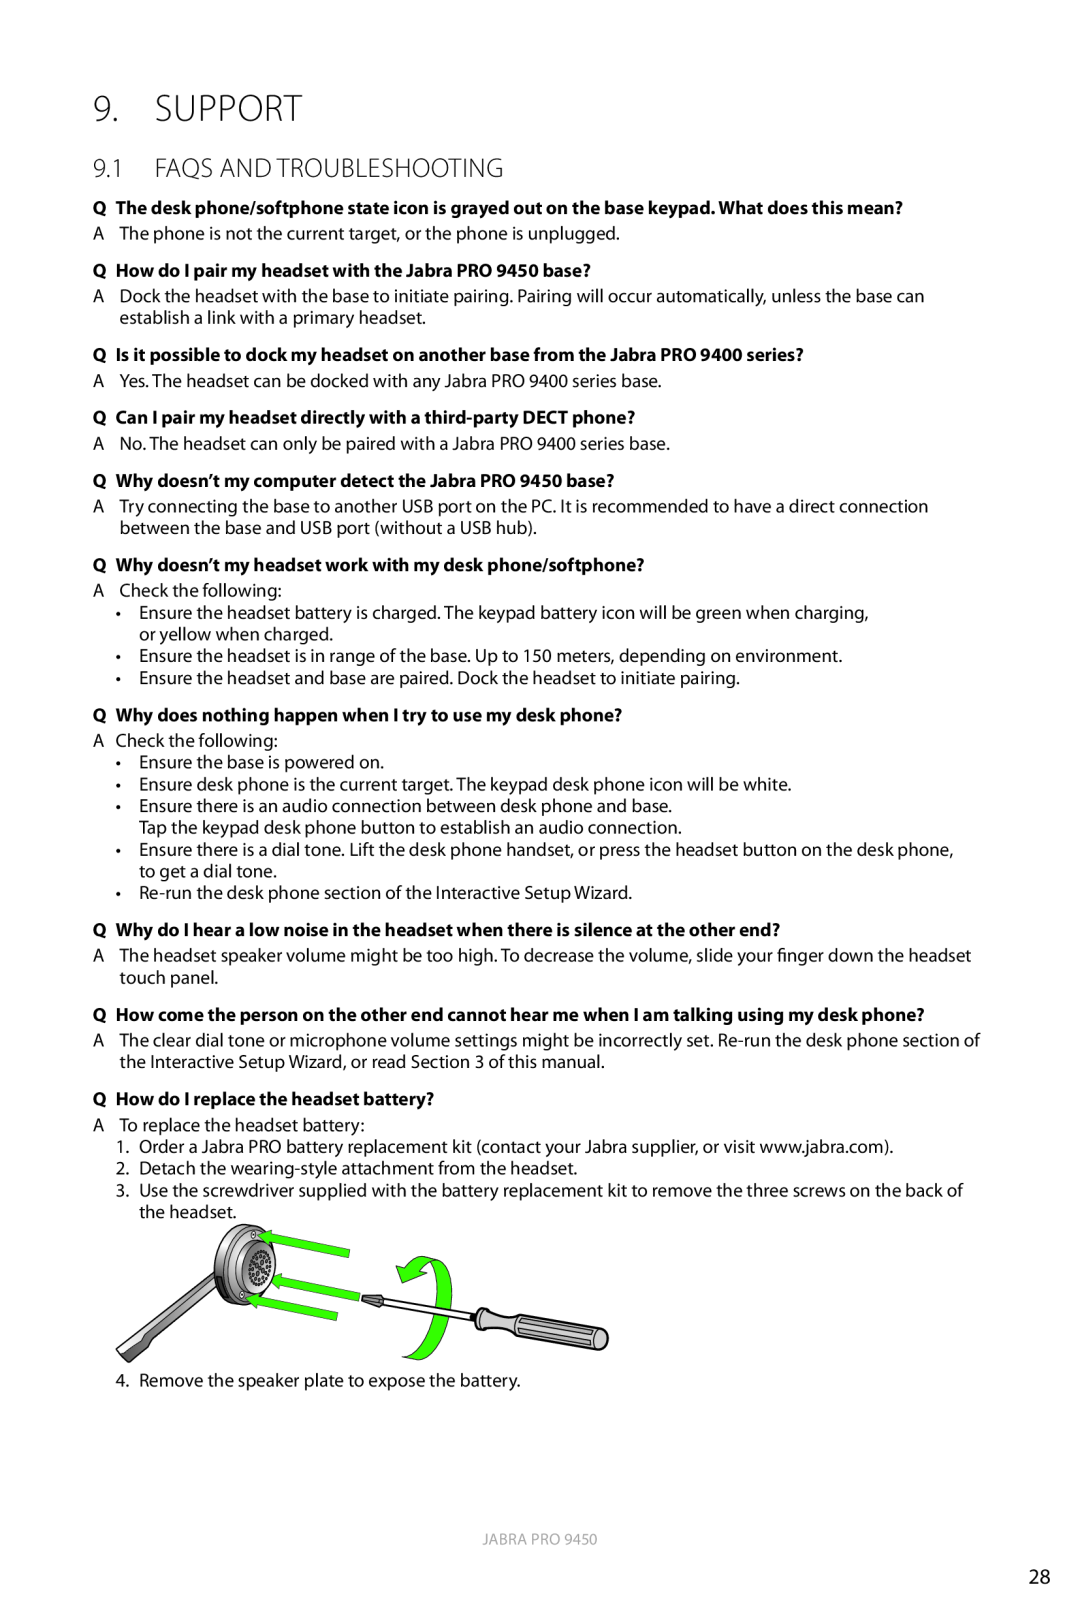 Jabra 9450 user manual Support, 9.1FAQS AND TROUBLESHOOTING 